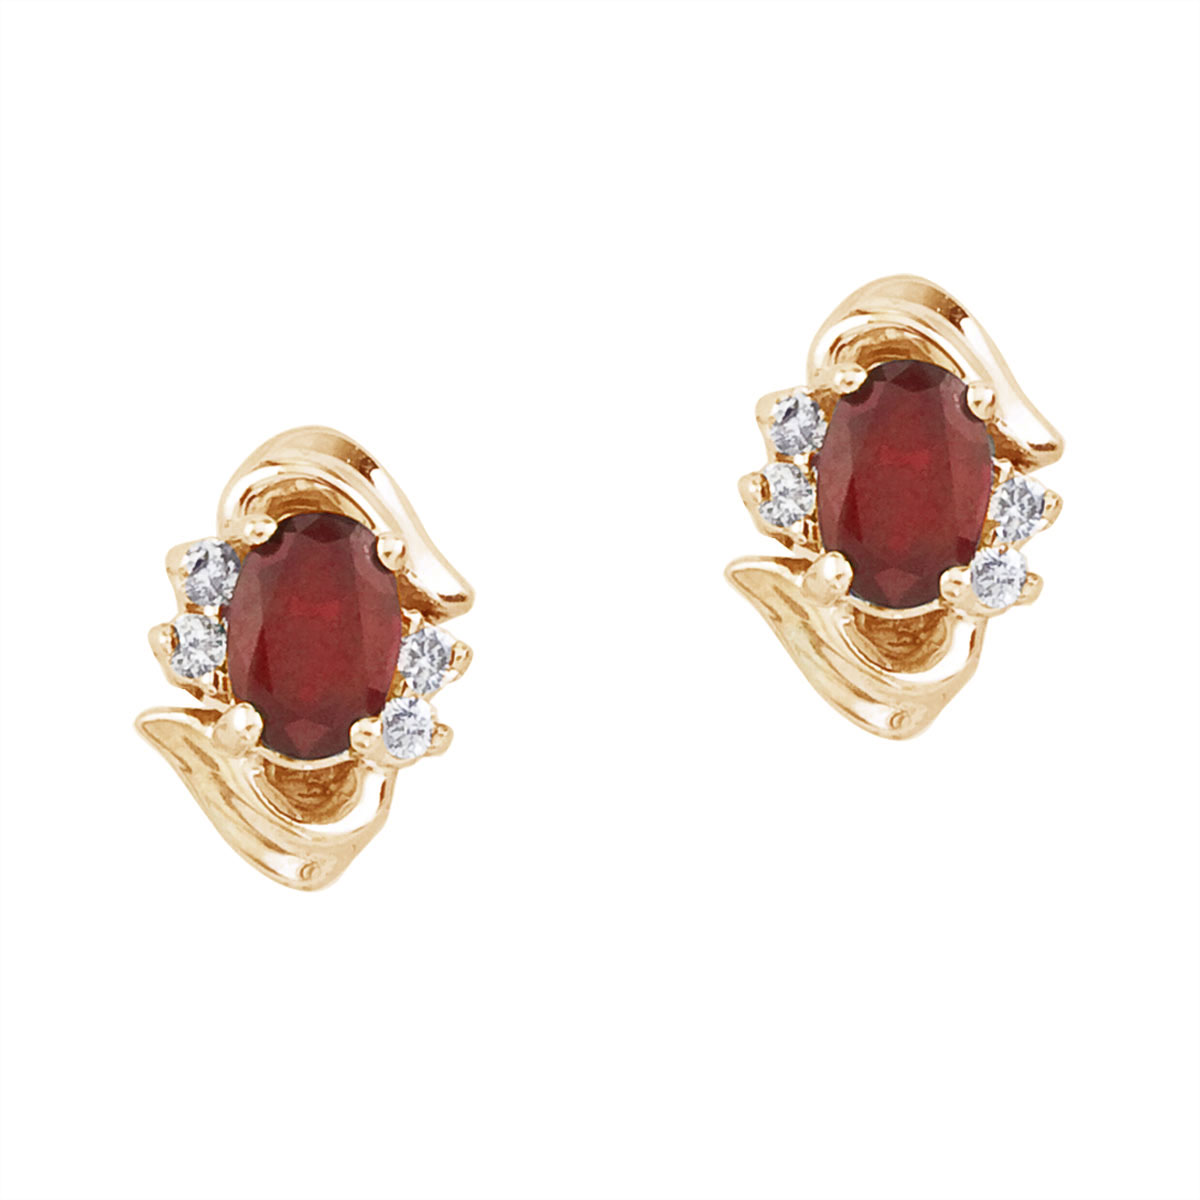 JCX2309: Stunning 14k yellow gold and ruby earrings. Featuring natural 6x4 mm oval rubies and .11 total carat diamonds.